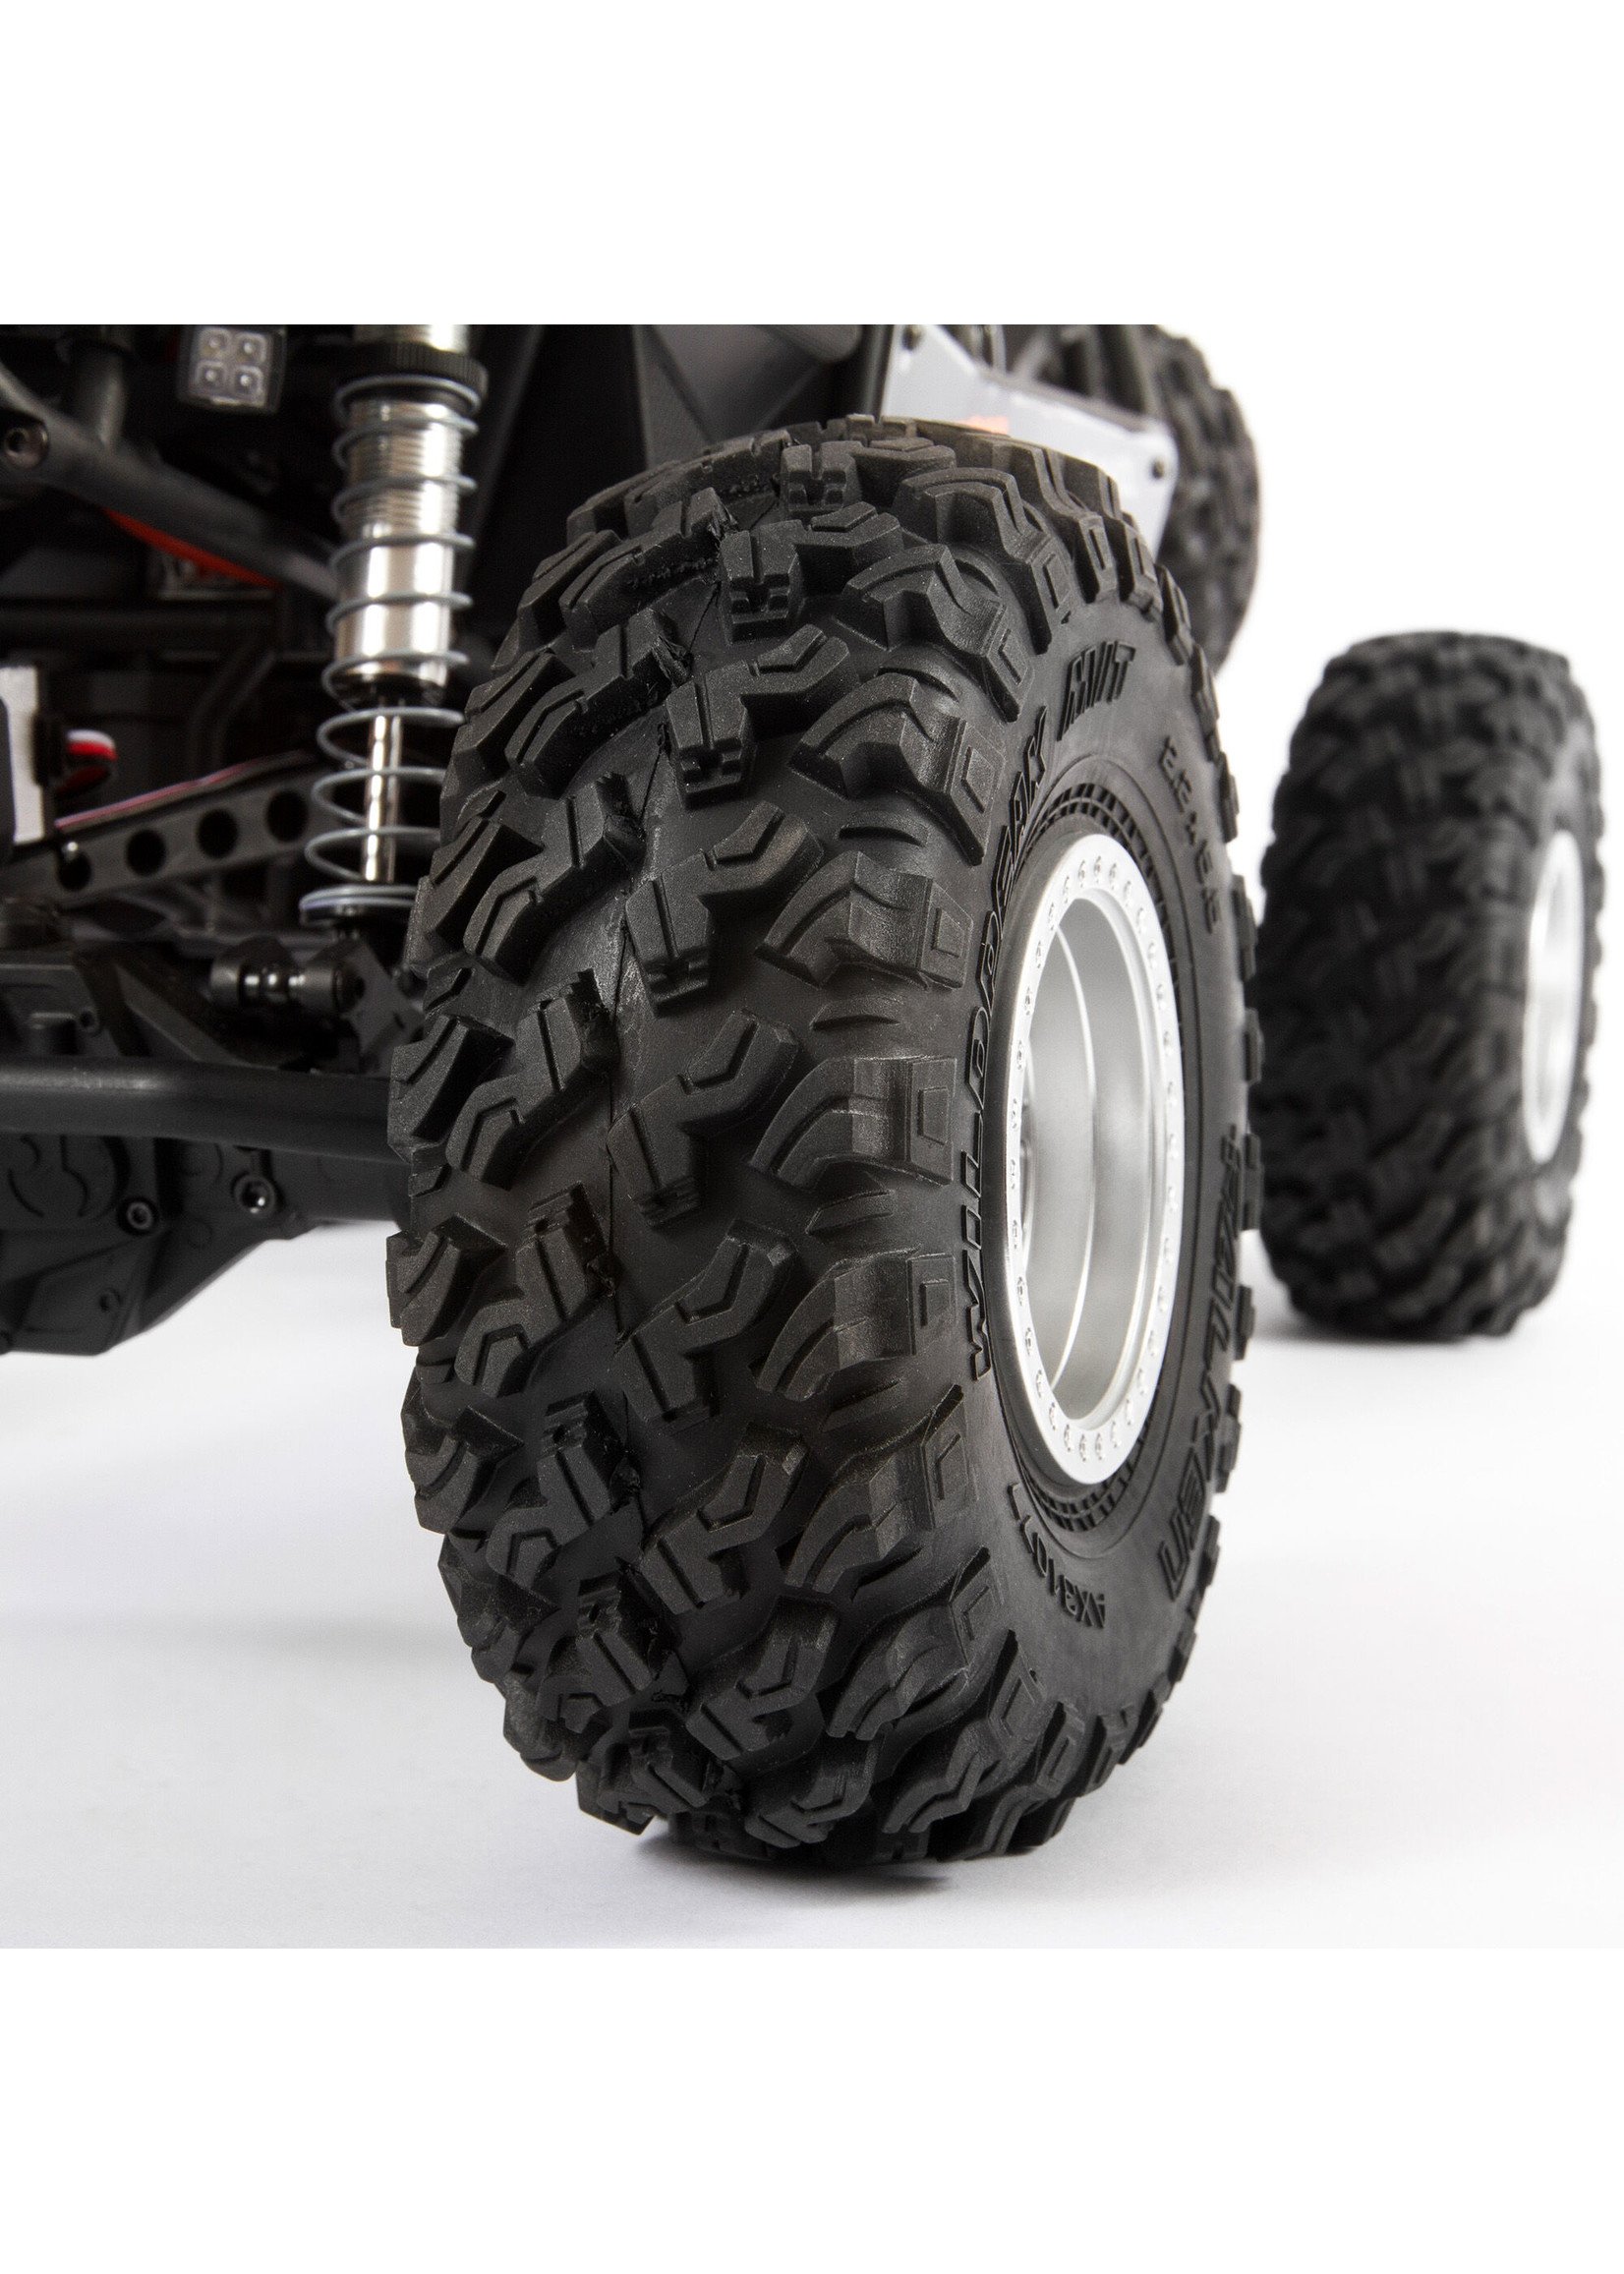 Axial 1/10 RR10 Bomber 4WD Rock Racer RTR - Grey